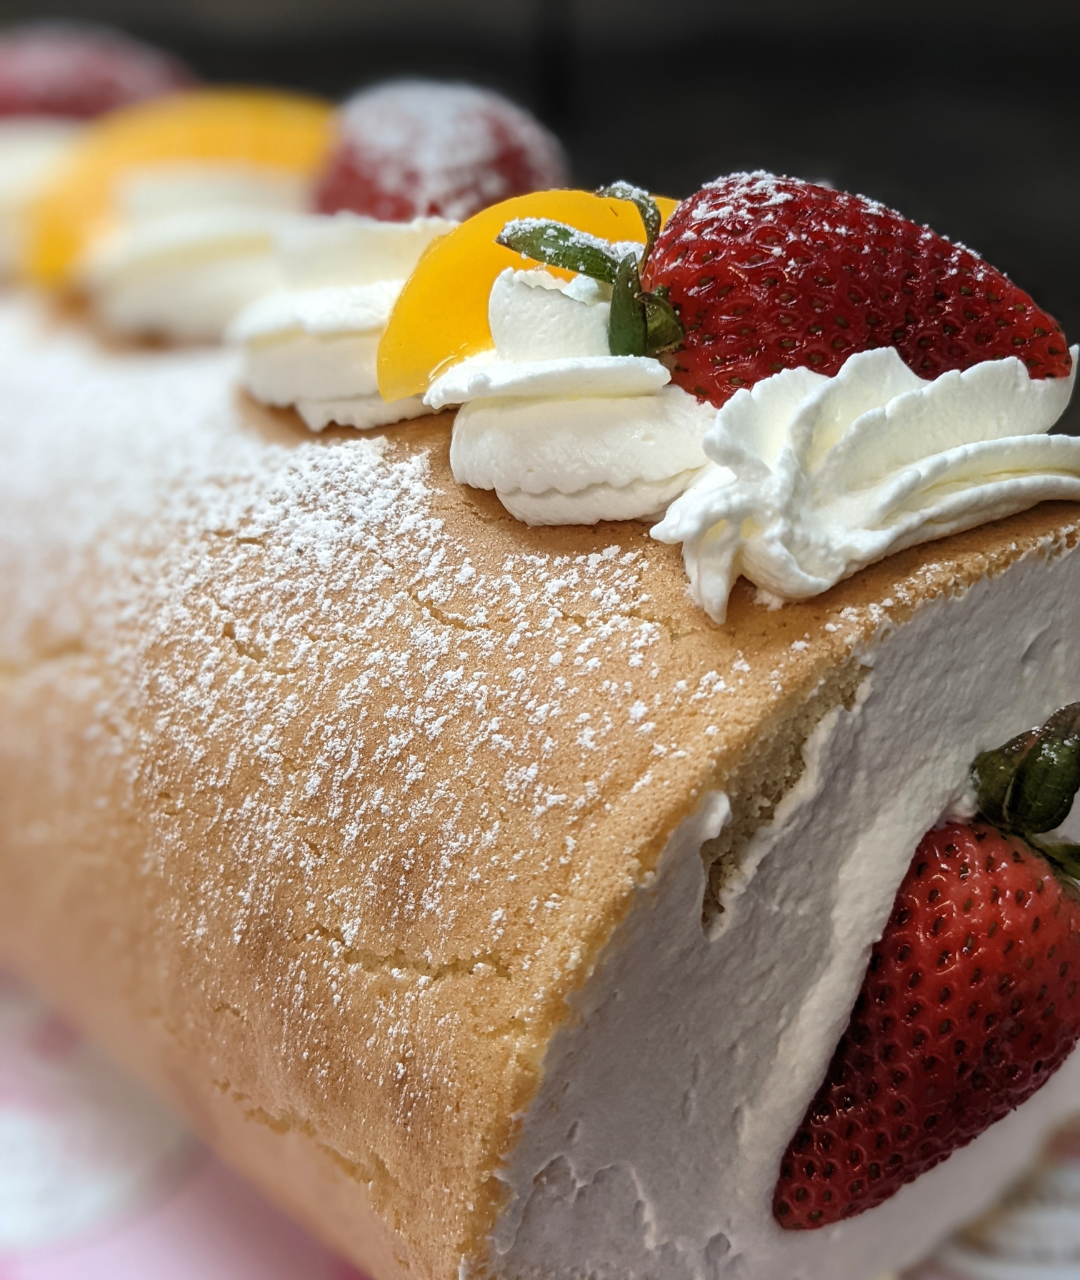 Cake roll with ( the fruit of your choice )